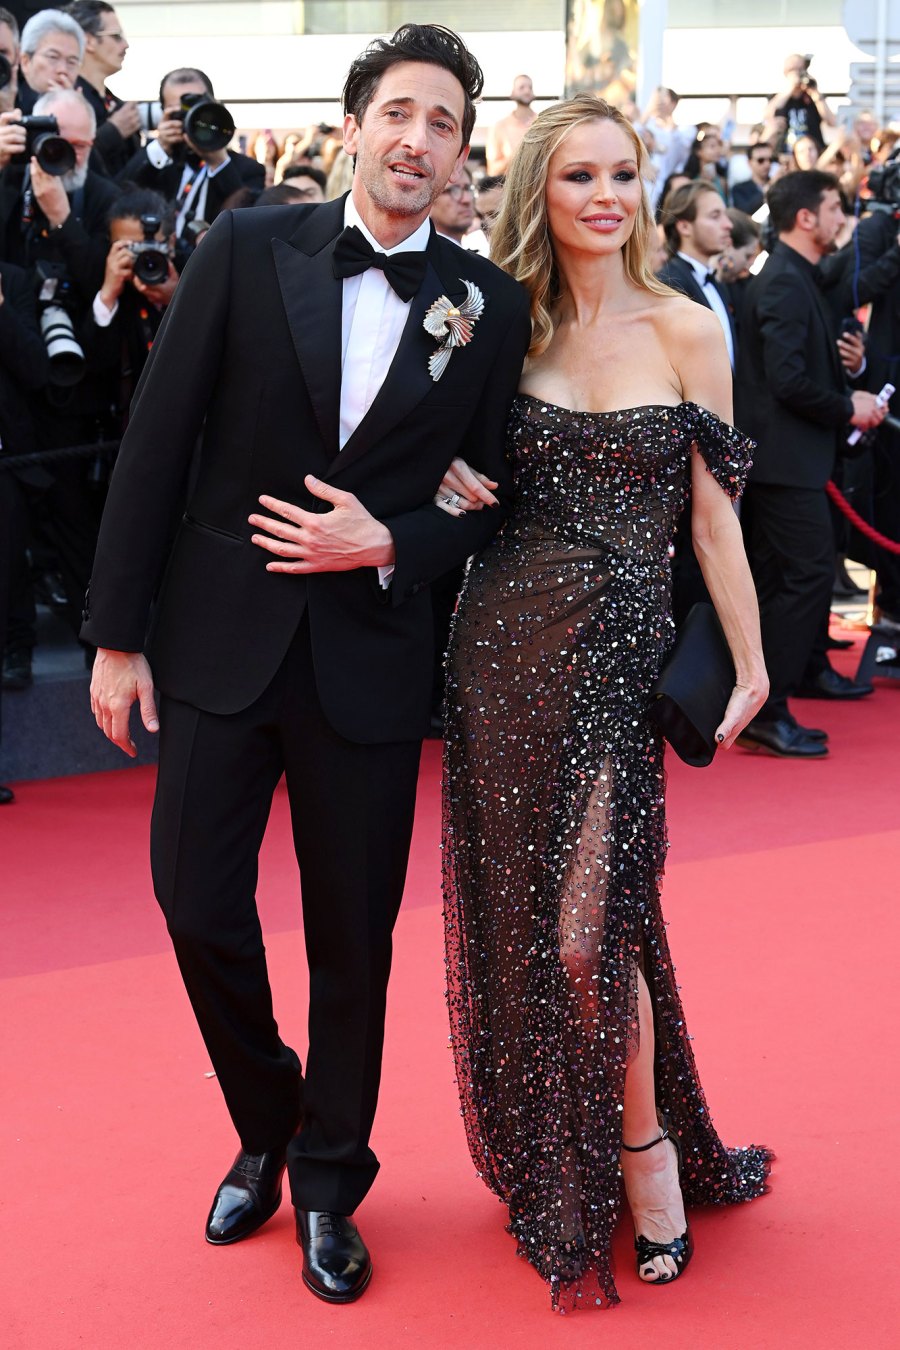 Adrien Brody and Georgina Chapman Power Couples at Cannes